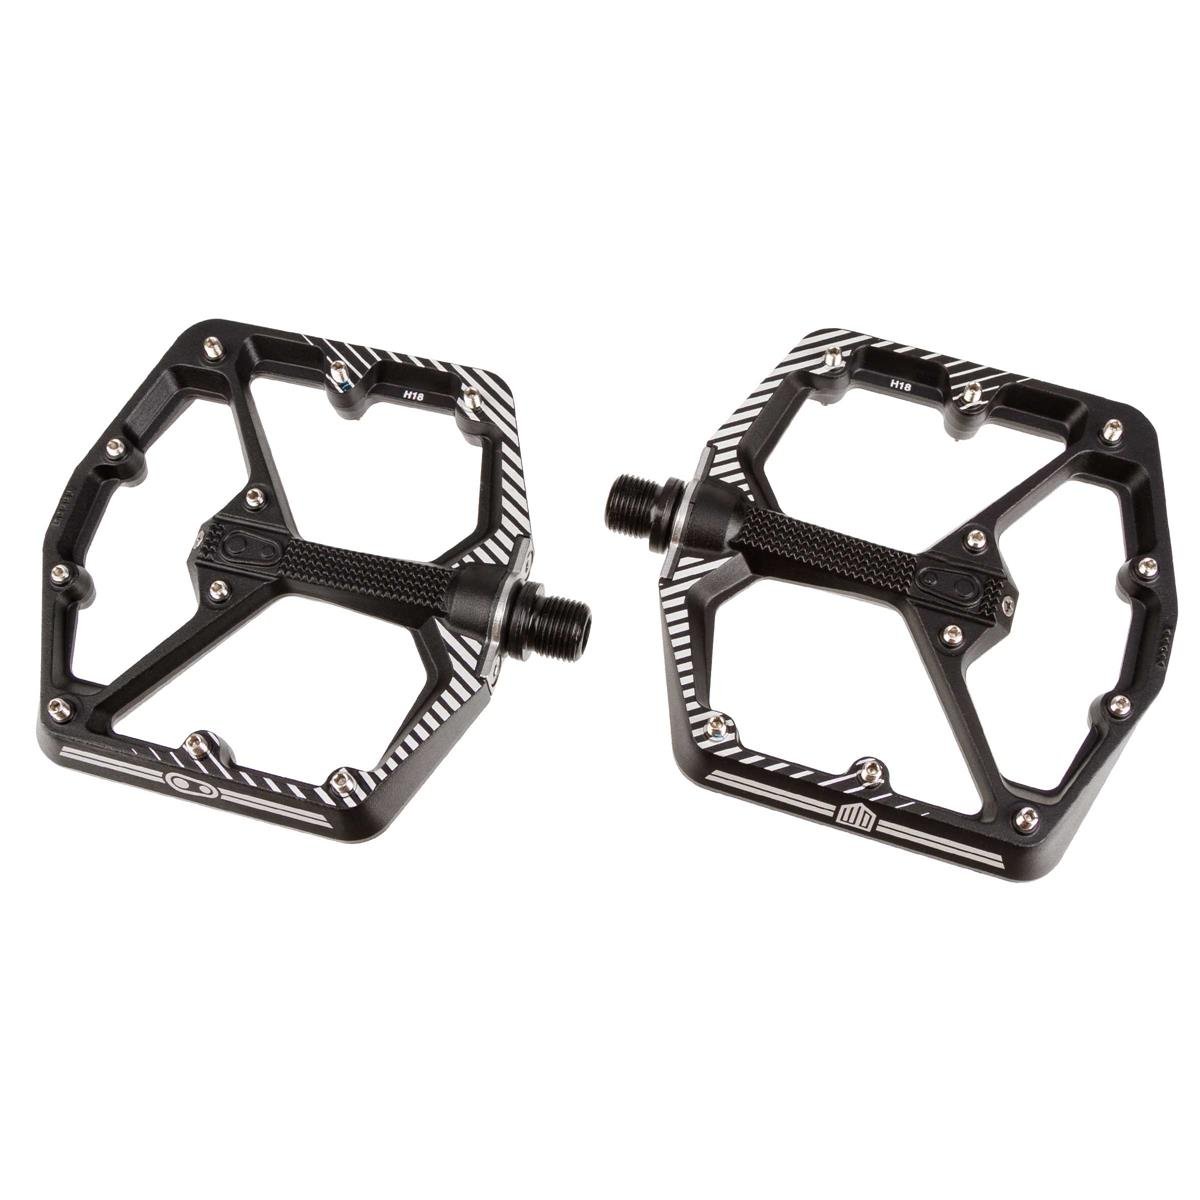 Crankbrothers Pedals Stamp 7 Danny MacAskill Edition, Raw/Black, Large